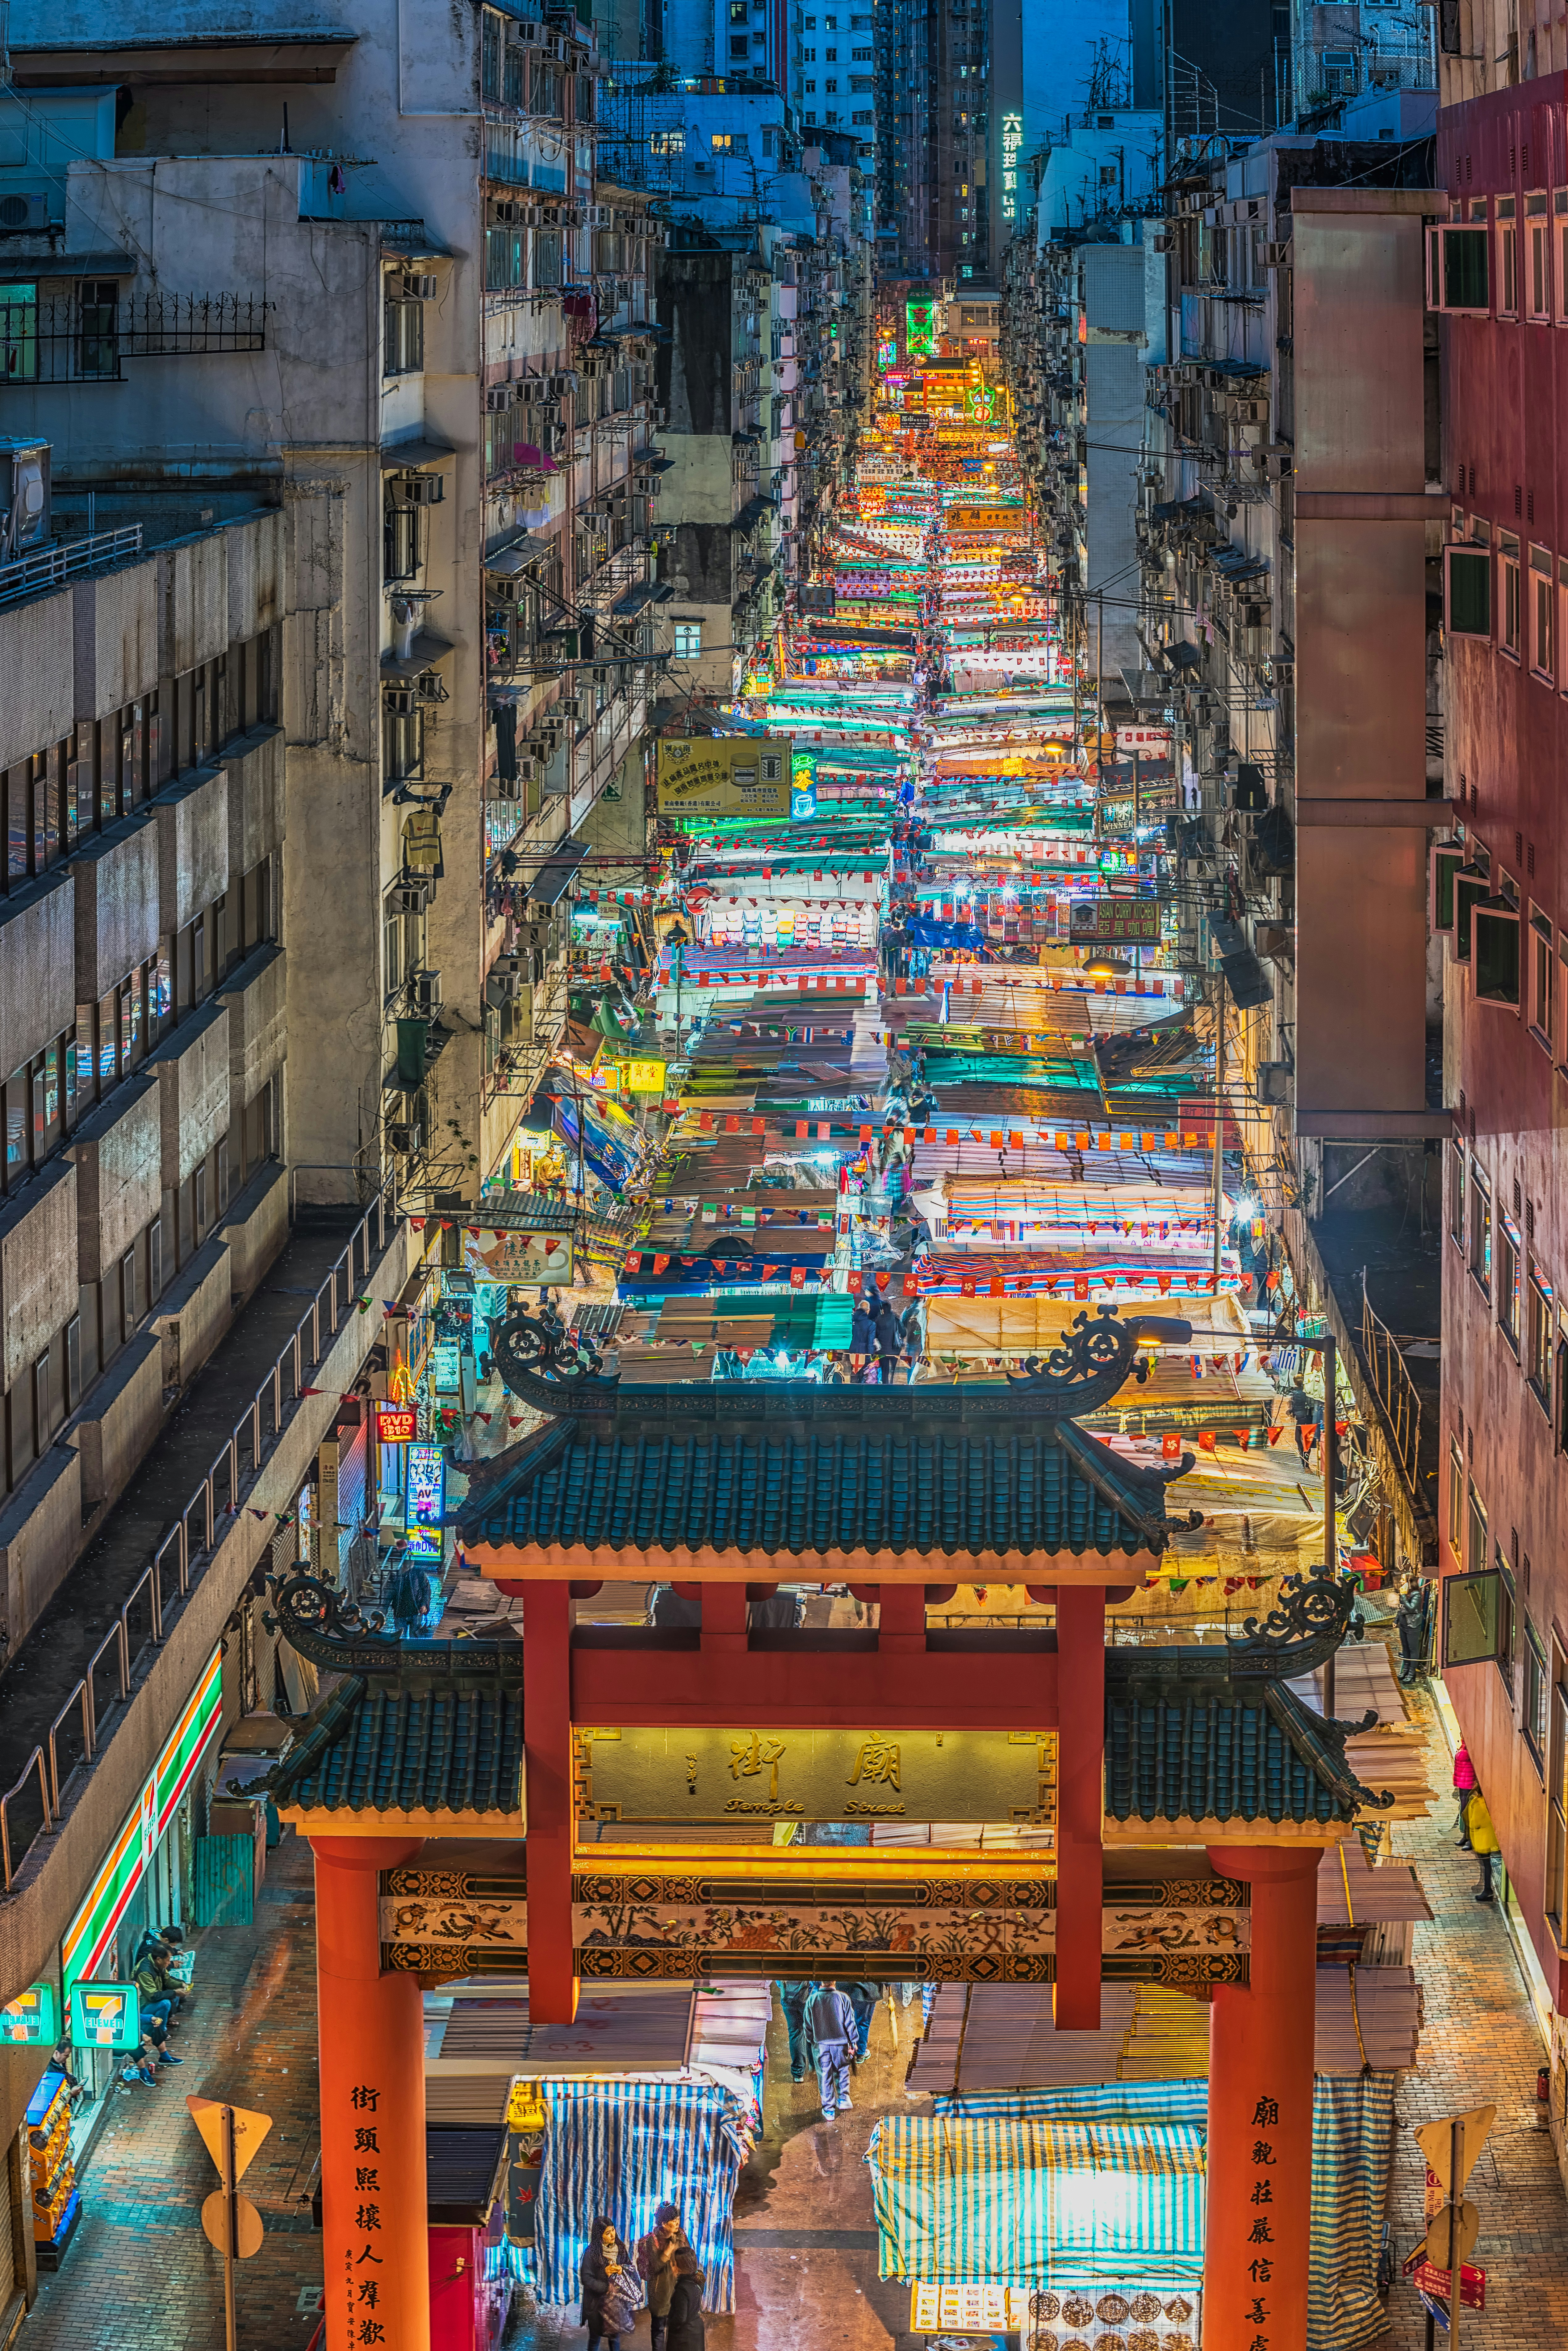 night market in the middle of houses